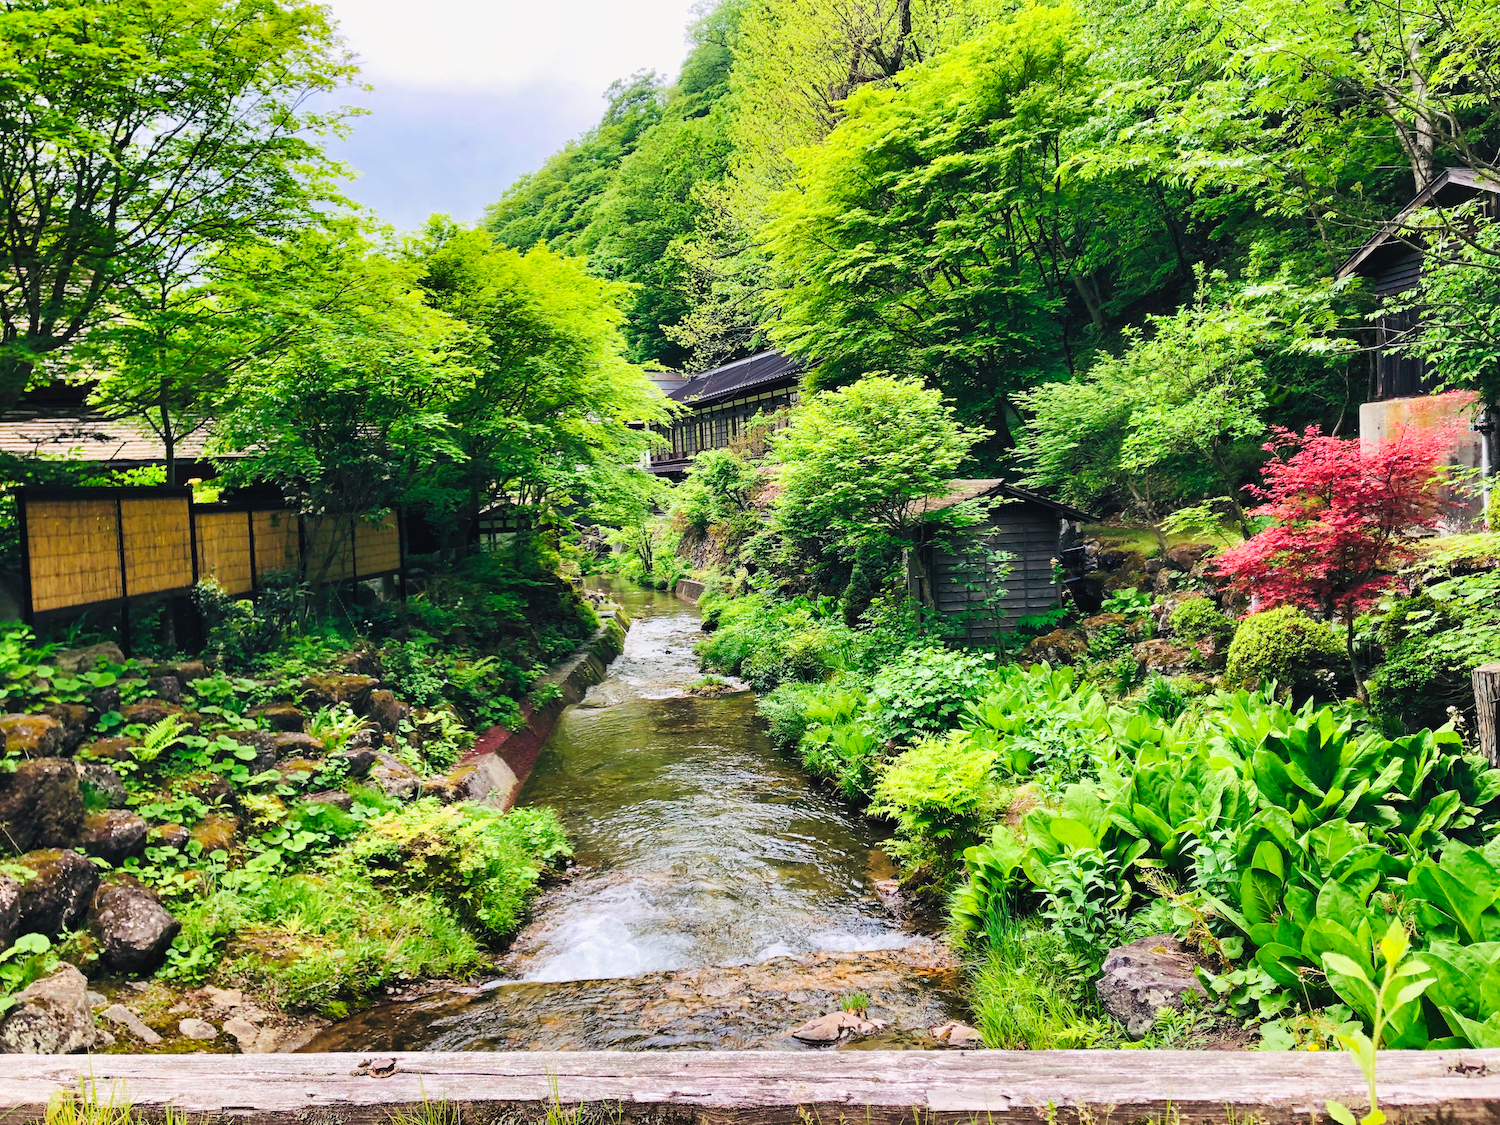 The grounds at Hoshi Onsen, Japan (Eat Me. Drink Me.)